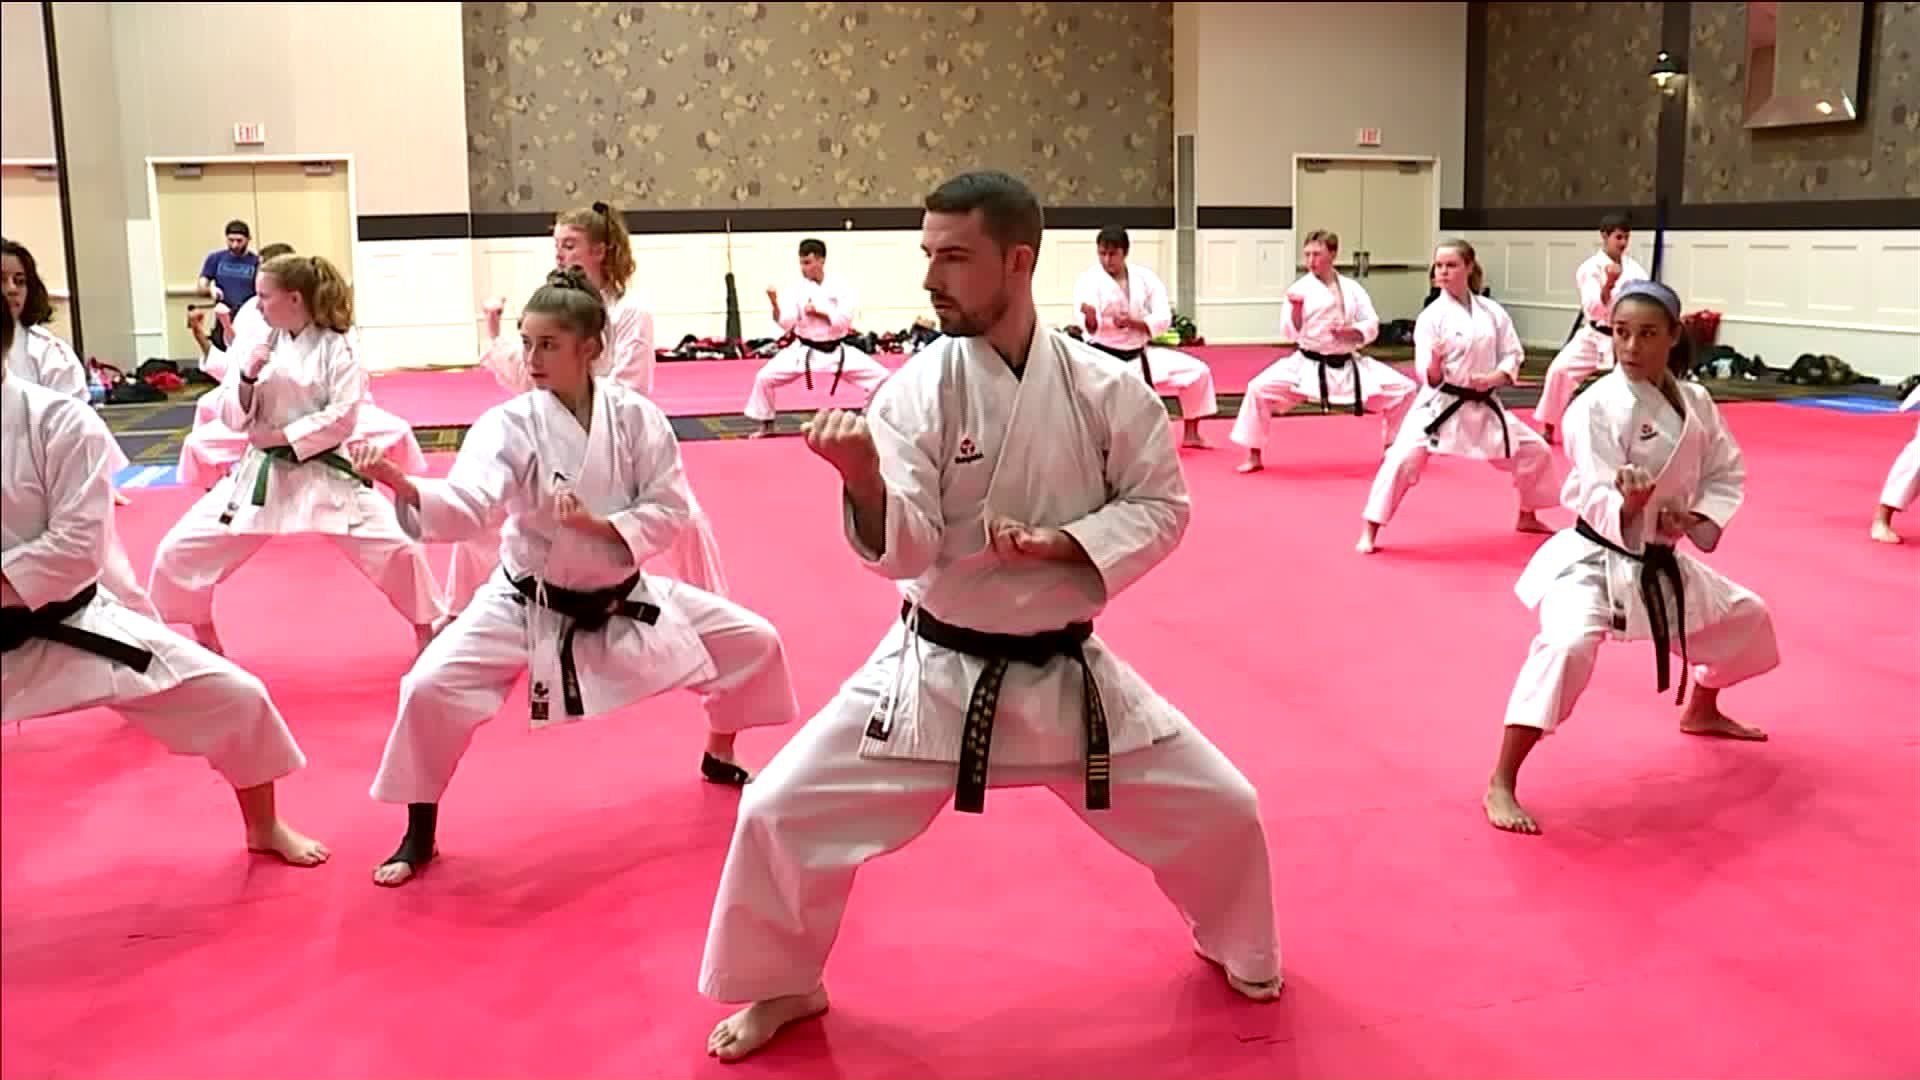 World karate champ shares his skills with other martial arts students